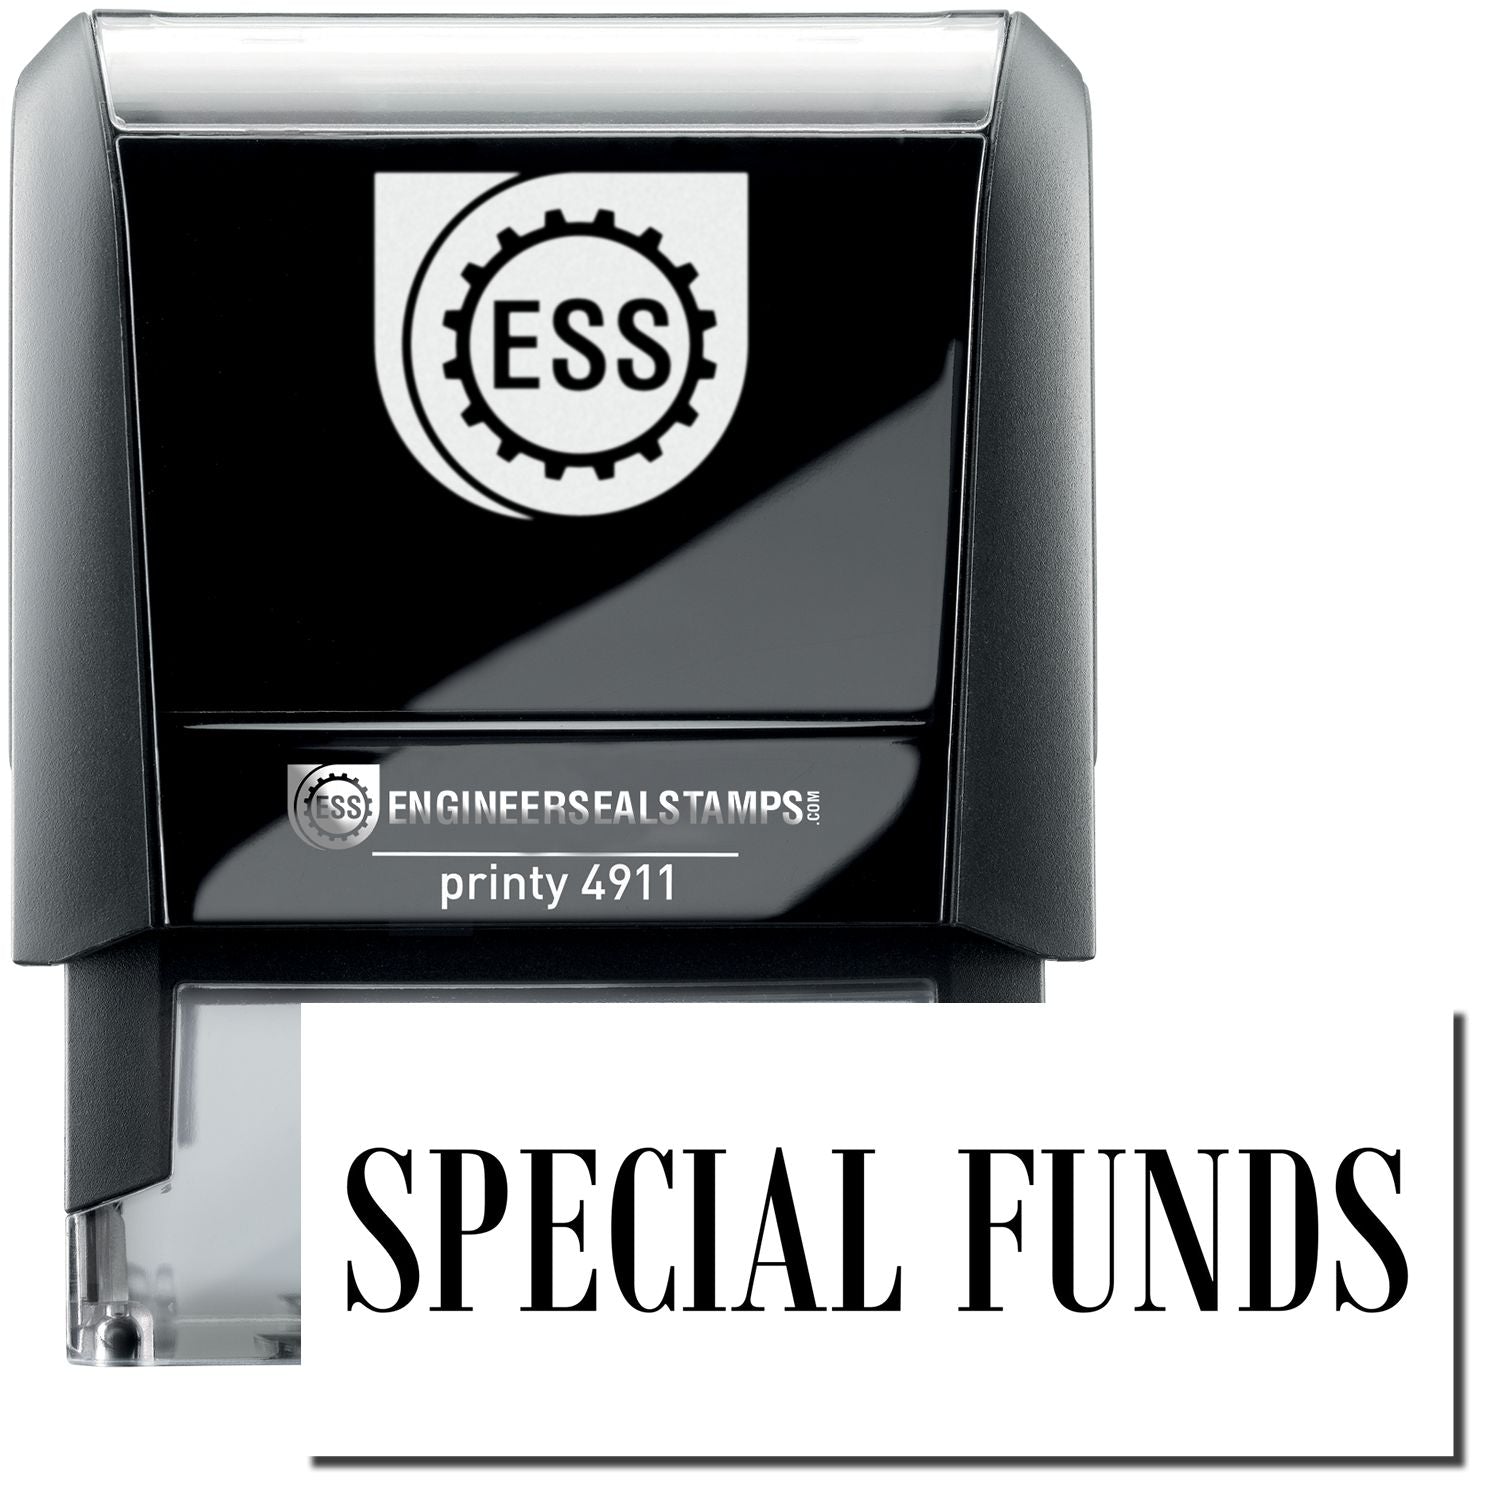 A self-inking stamp with a stamped image showing how the text "SPECIAL FUNDS" is displayed after stamping.